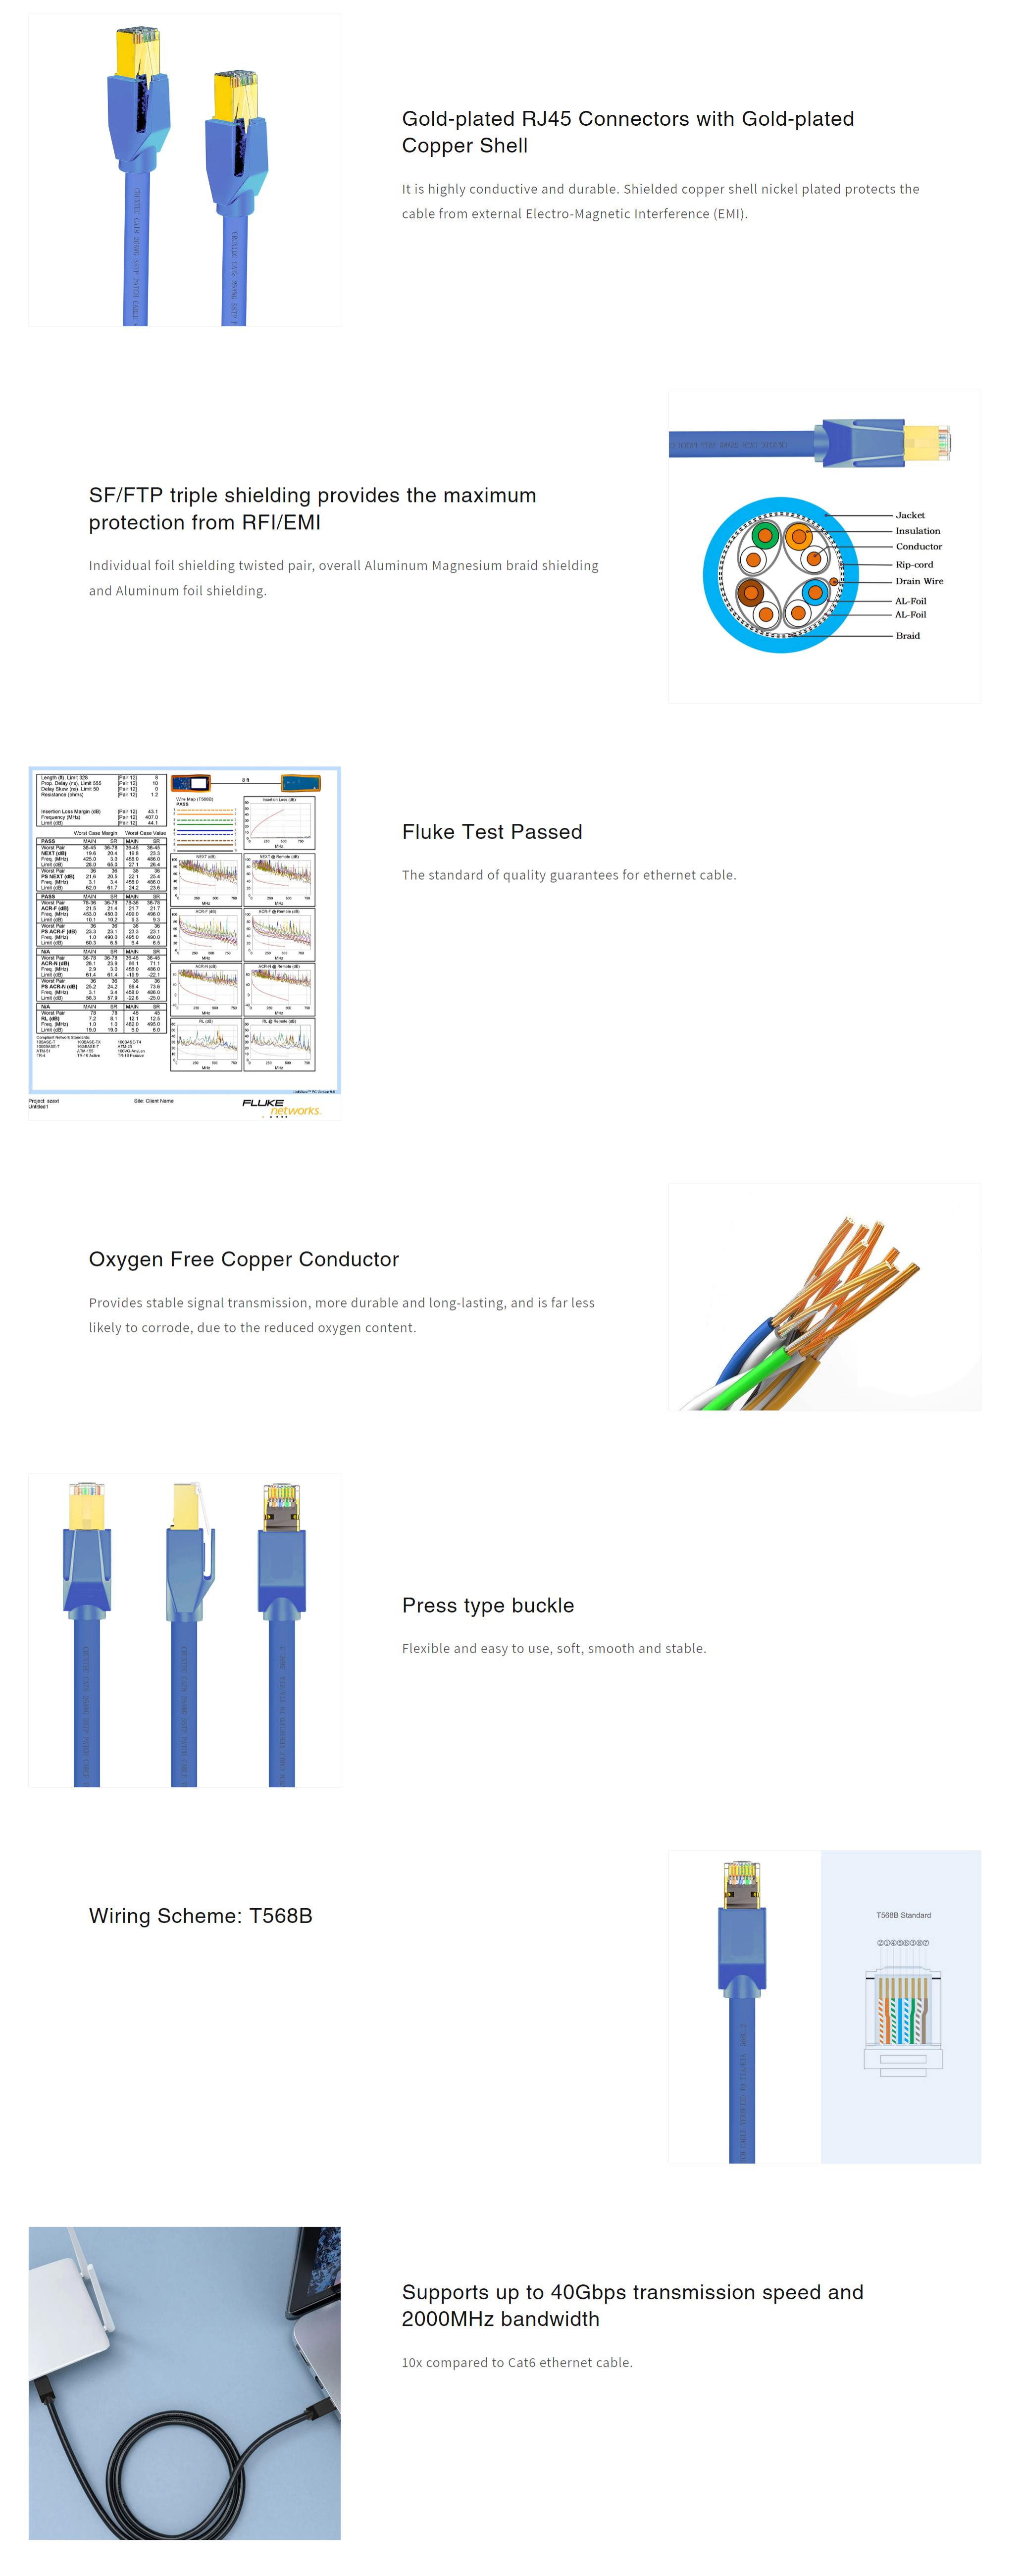 A large marketing image providing additional information about the product Cruxtec CAT8 3m 40GbE SF/FTP Triple Shielding Ethernet Cable Blue - Additional alt info not provided